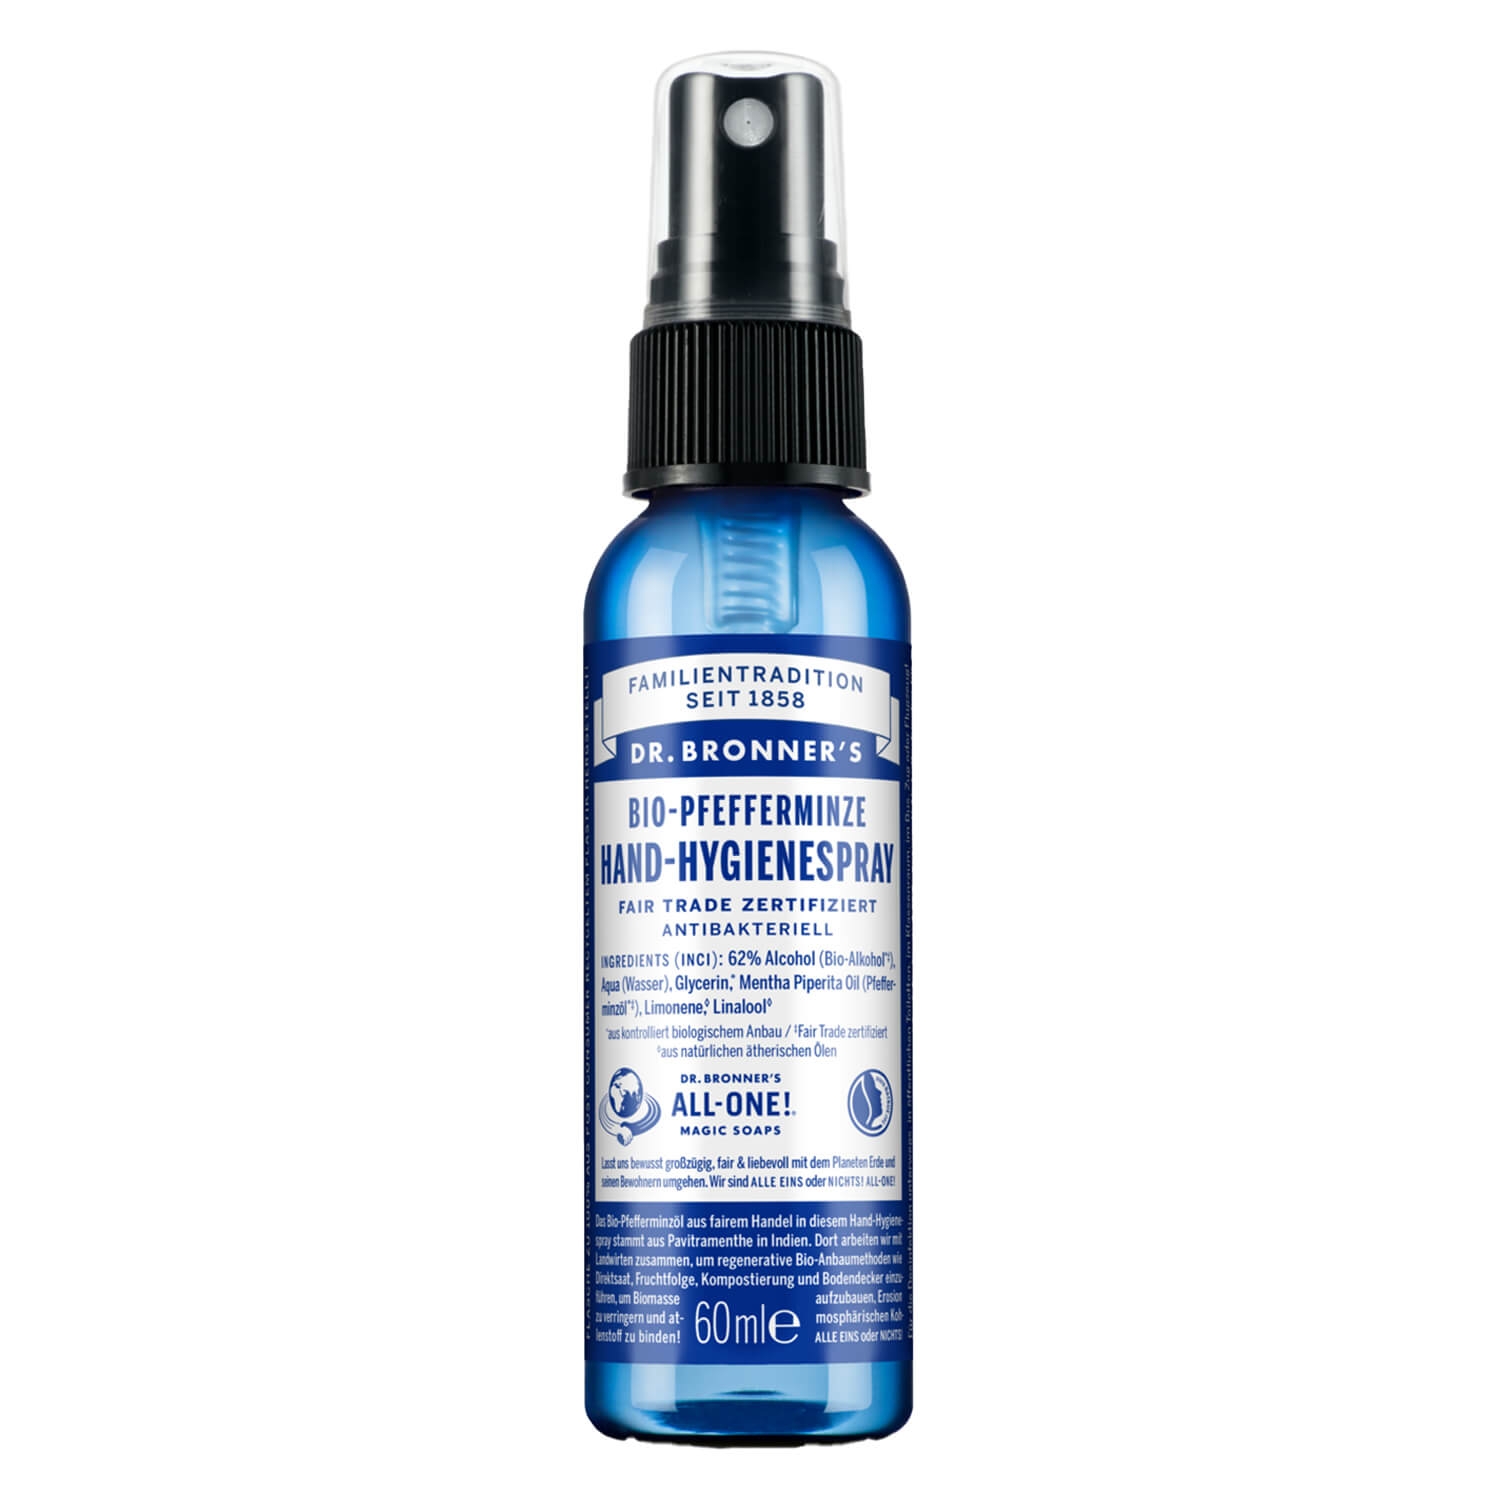 Product image from DR. BRONNER'S - Hygienespray Pfefferminz